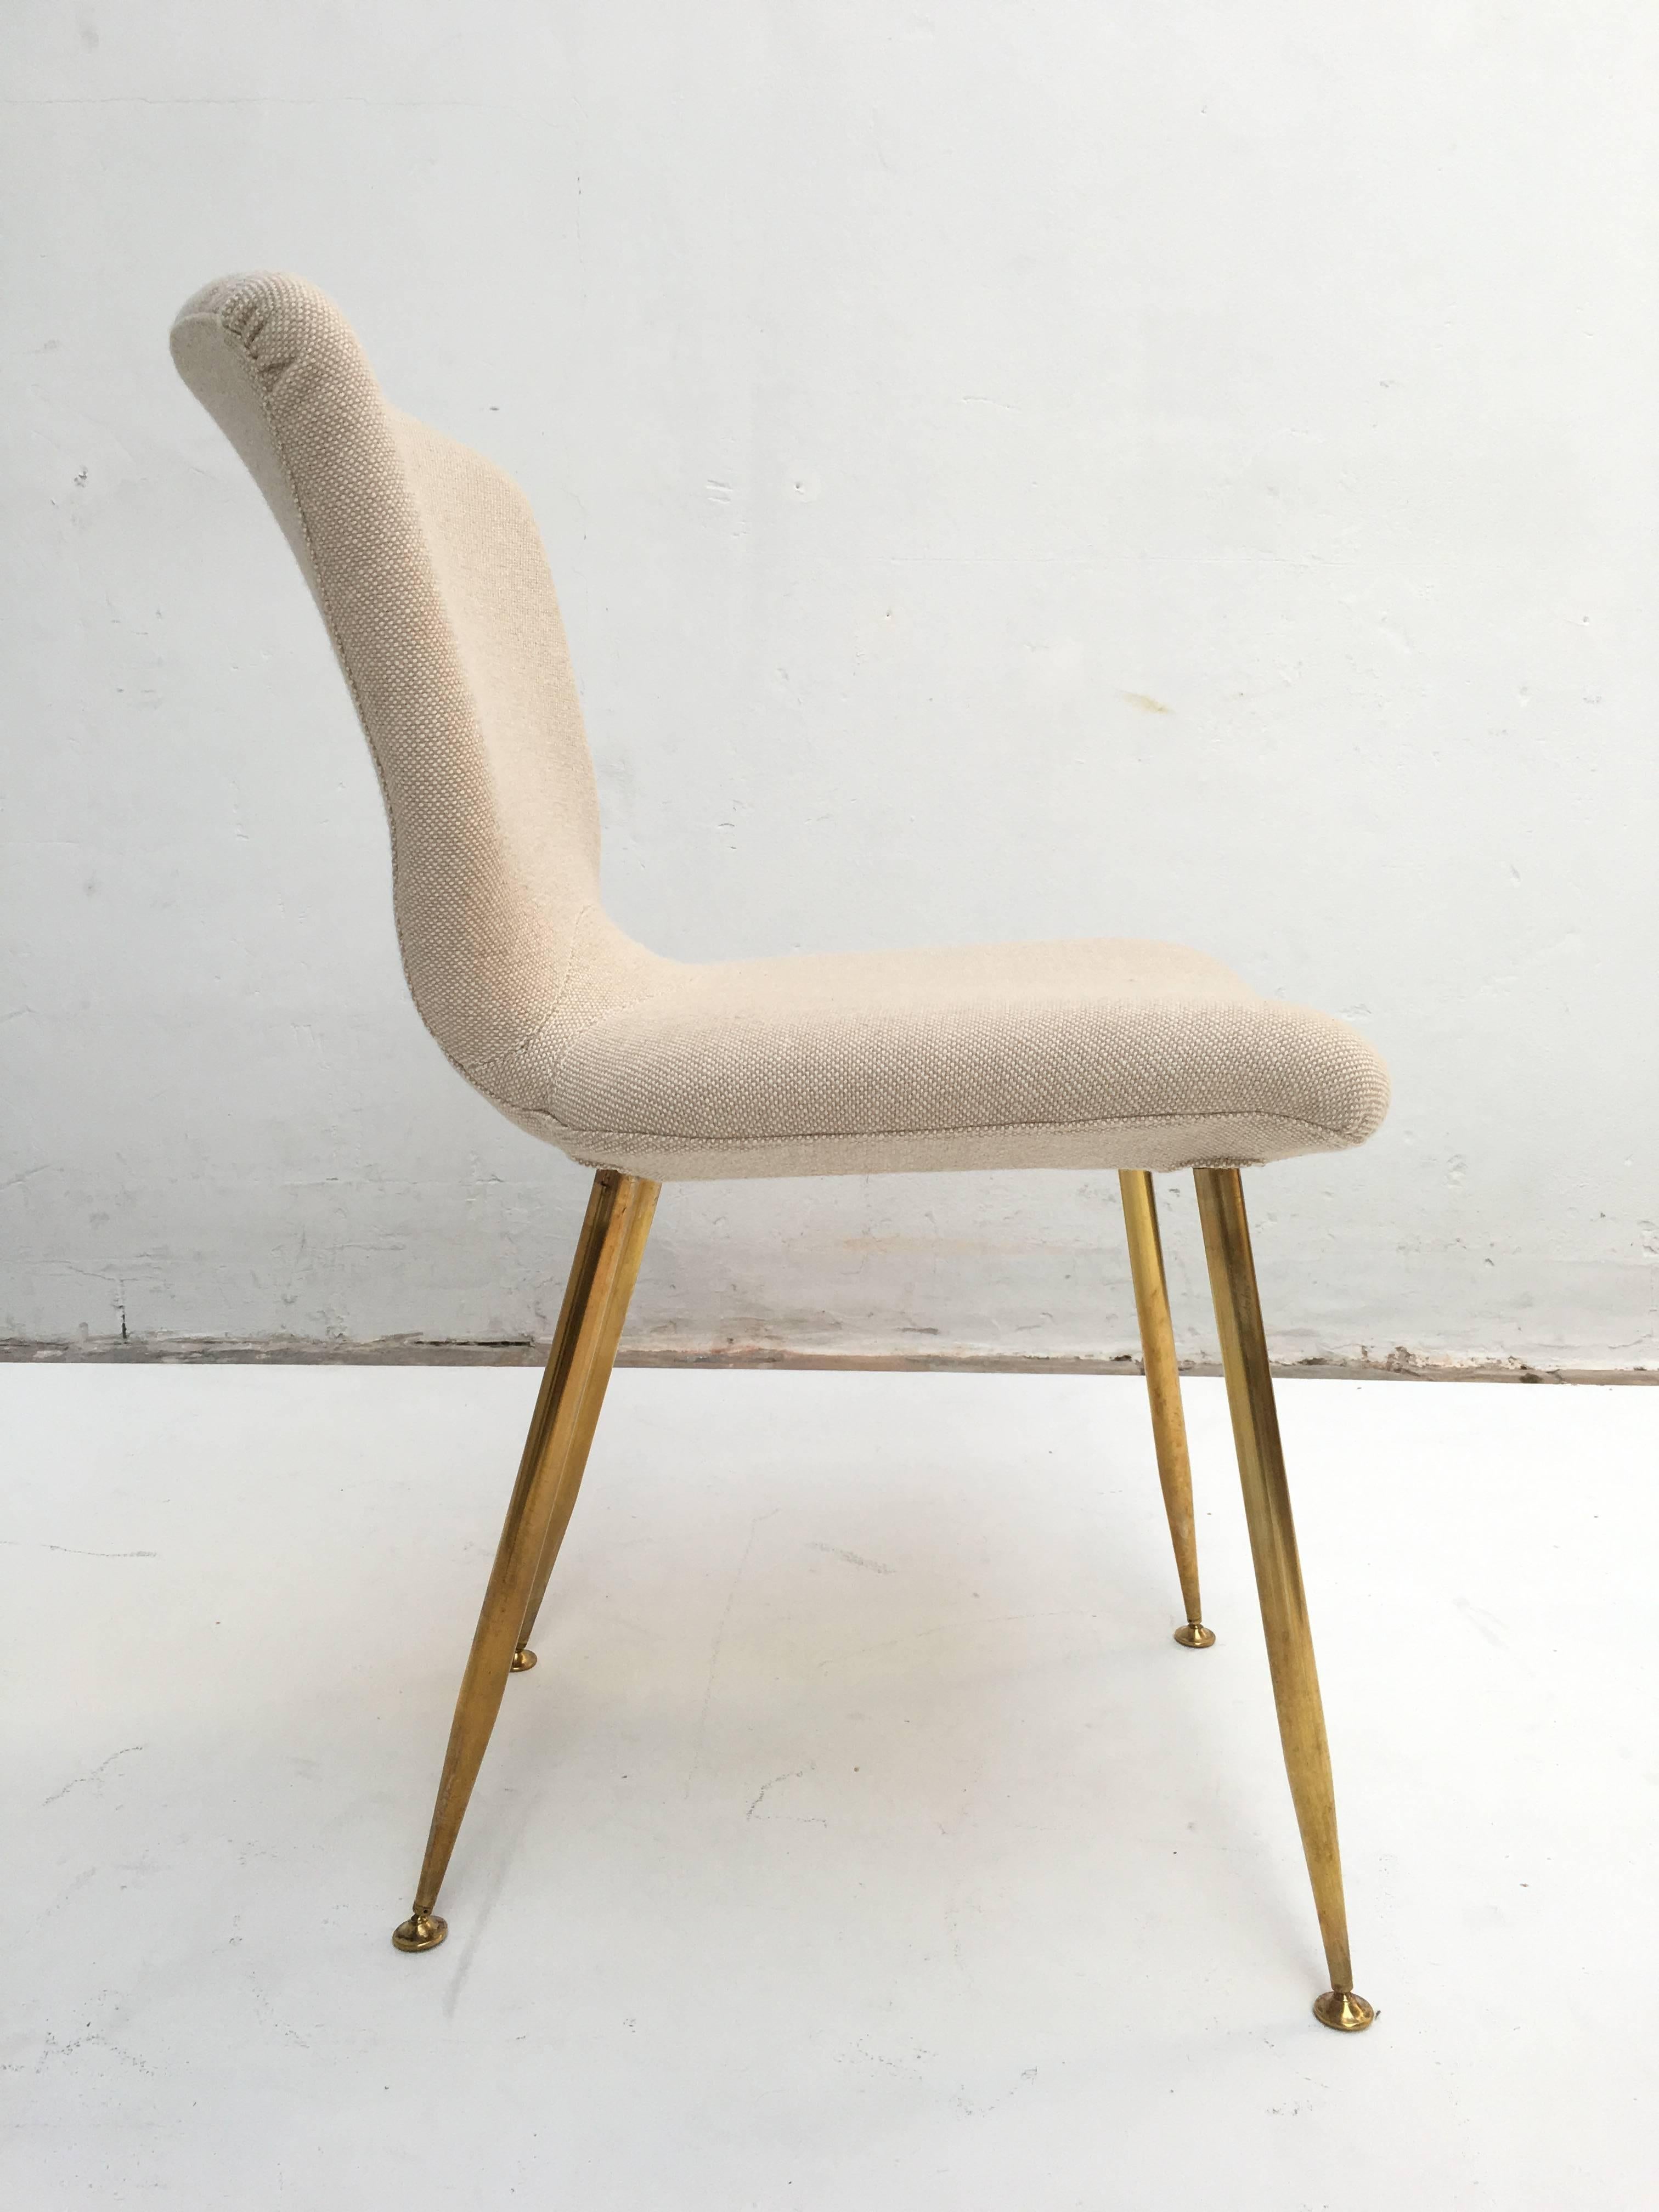 12 dining chairs by Louis Sognot for ARFLEX, 1959. Brass legs, Upholstery restored 4